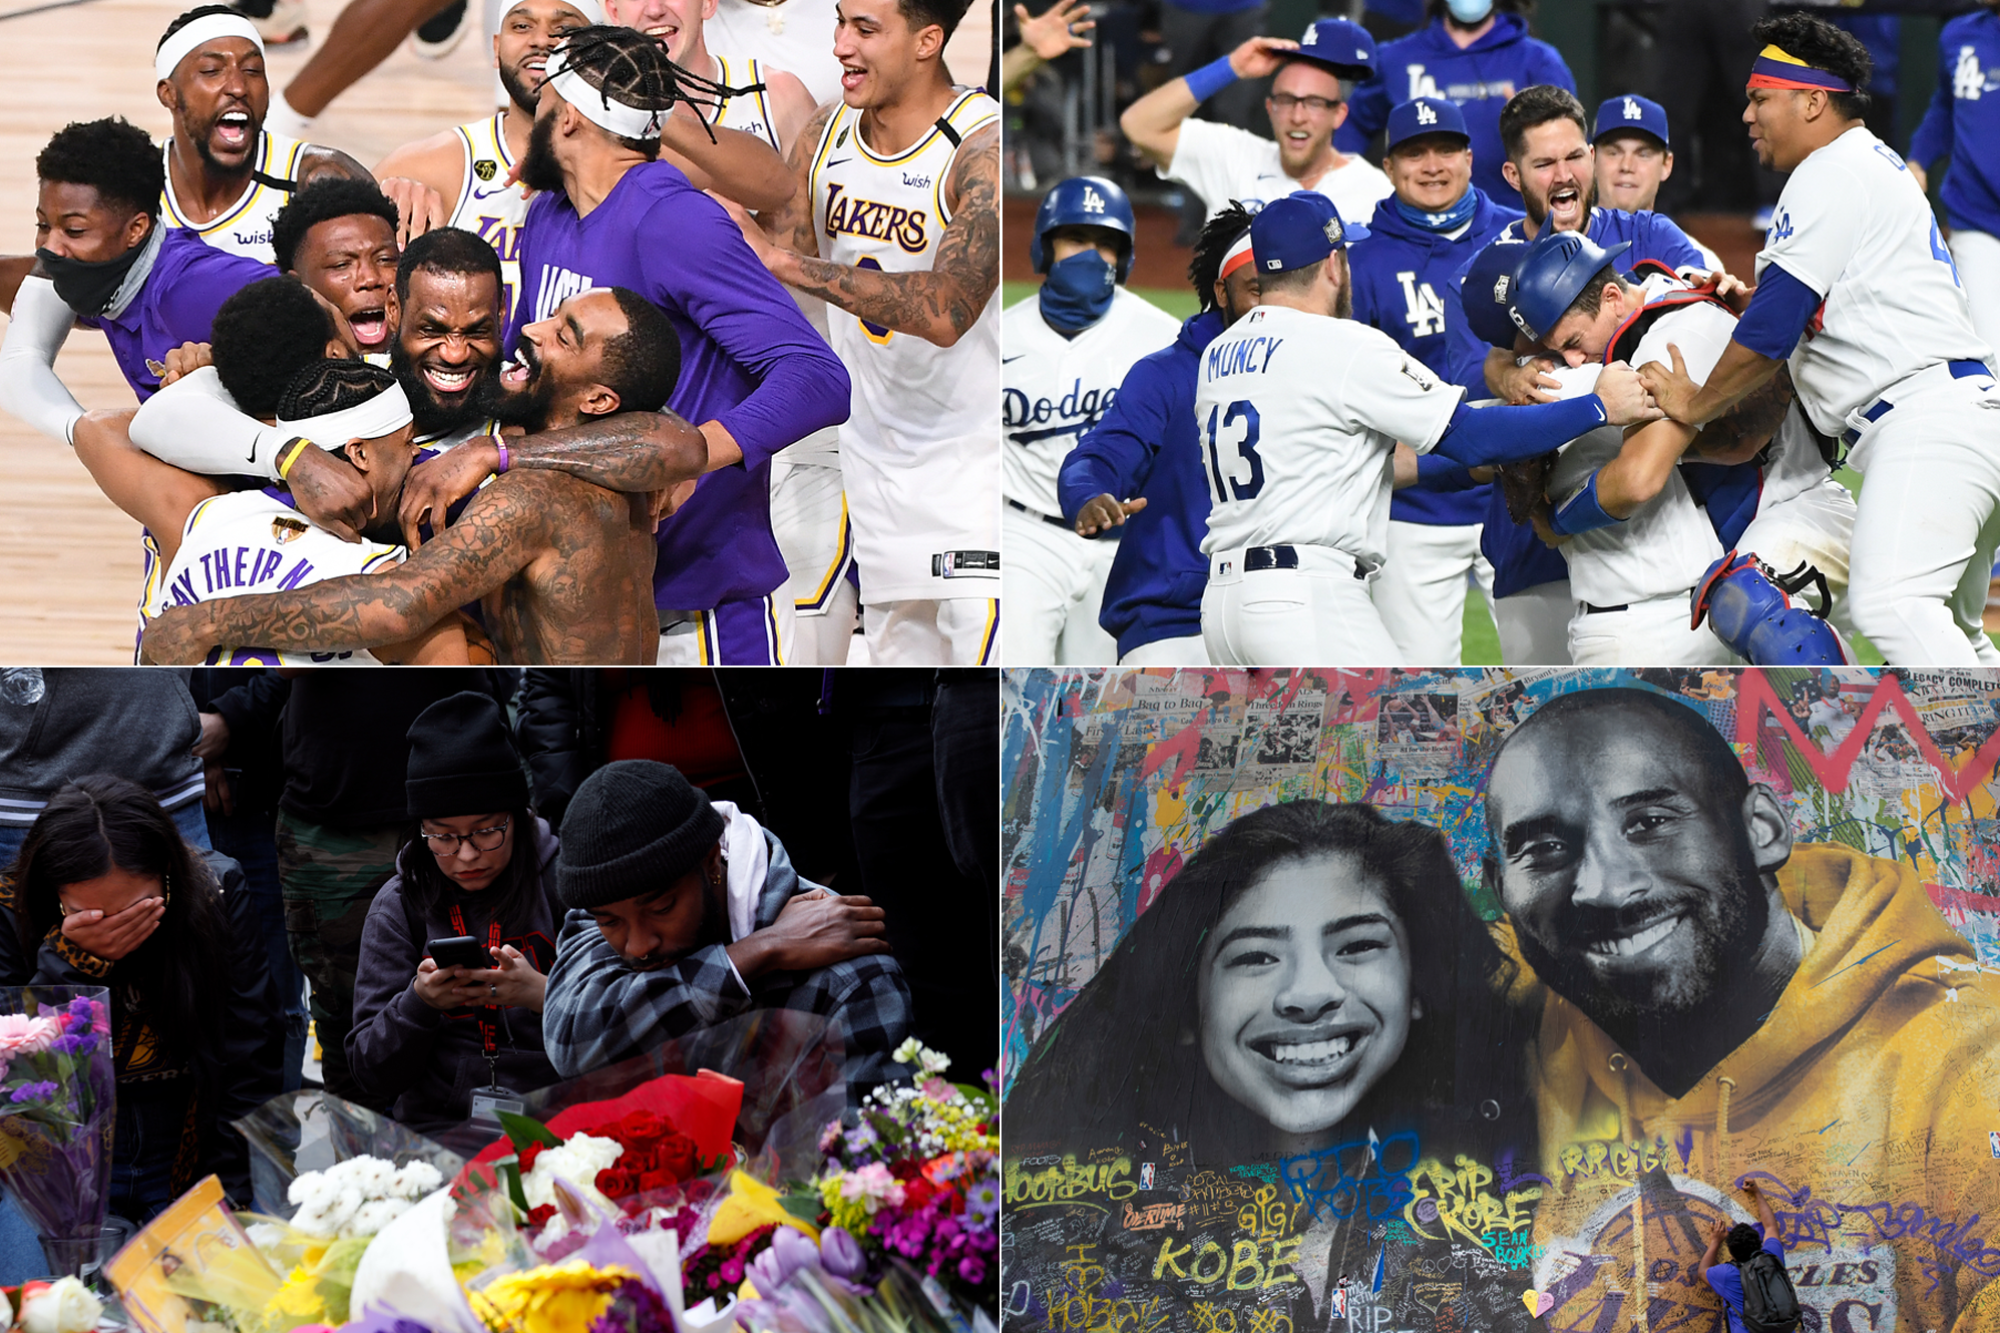 Images of the Lakers and Dodgers winning titles and fans mourning the death of Kobe Bryant.